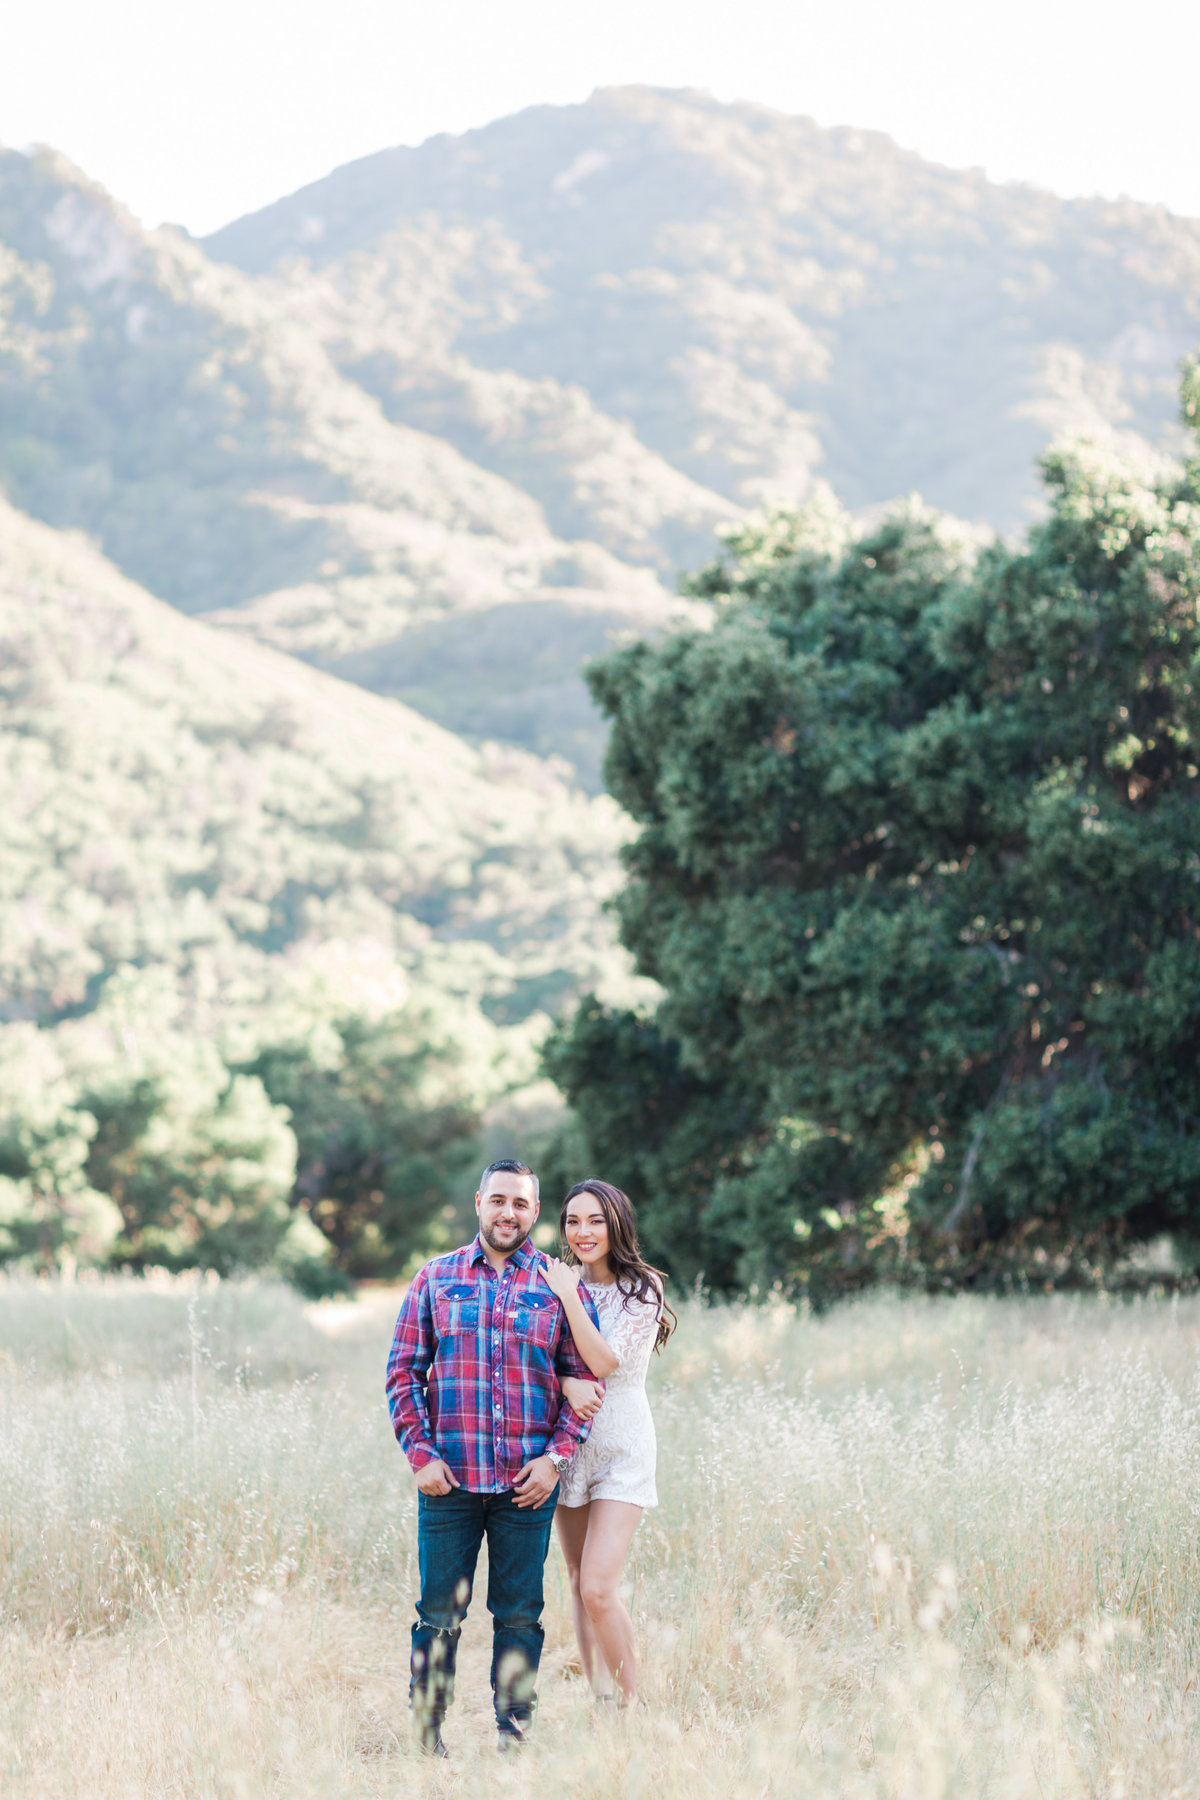 Malibu Creek State Park Engagement Session_Valorie Darling Photography-6986